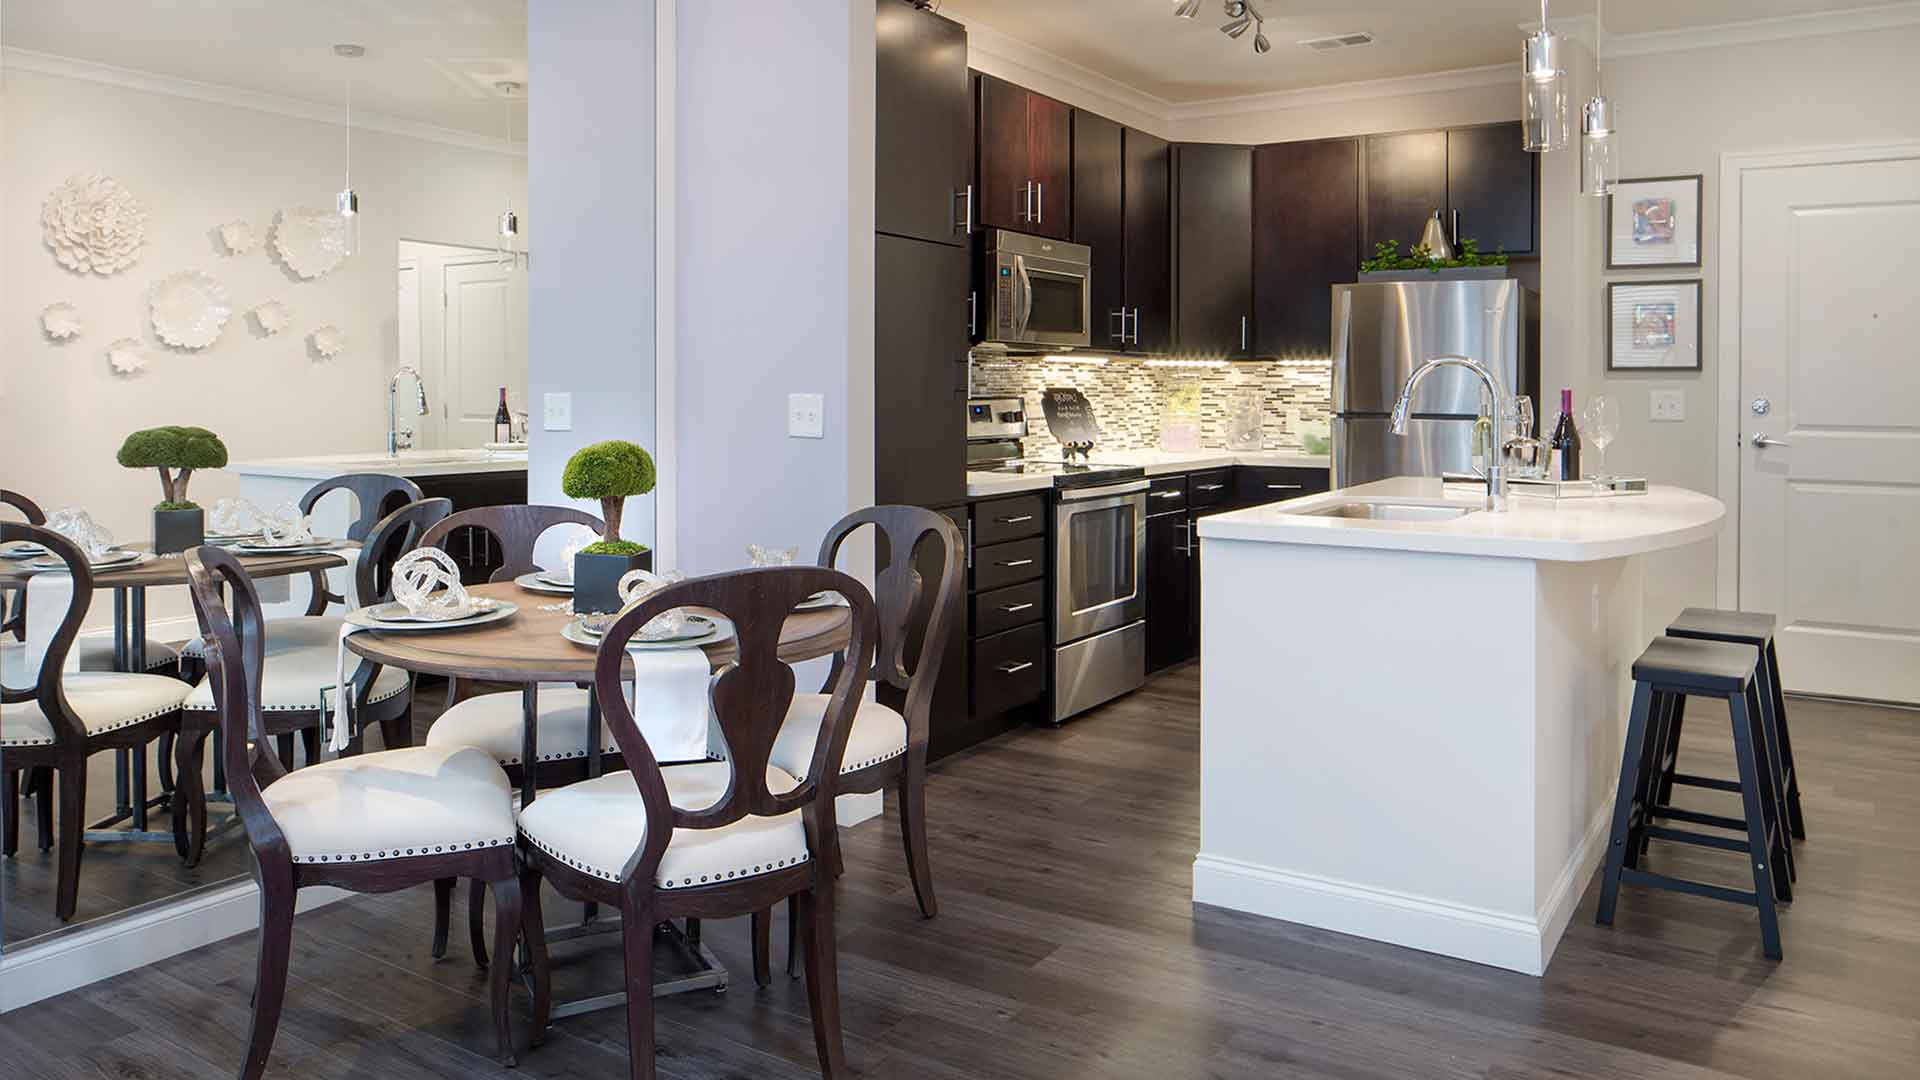 Decorated open concept kitchen and dining area at 49Hundred.